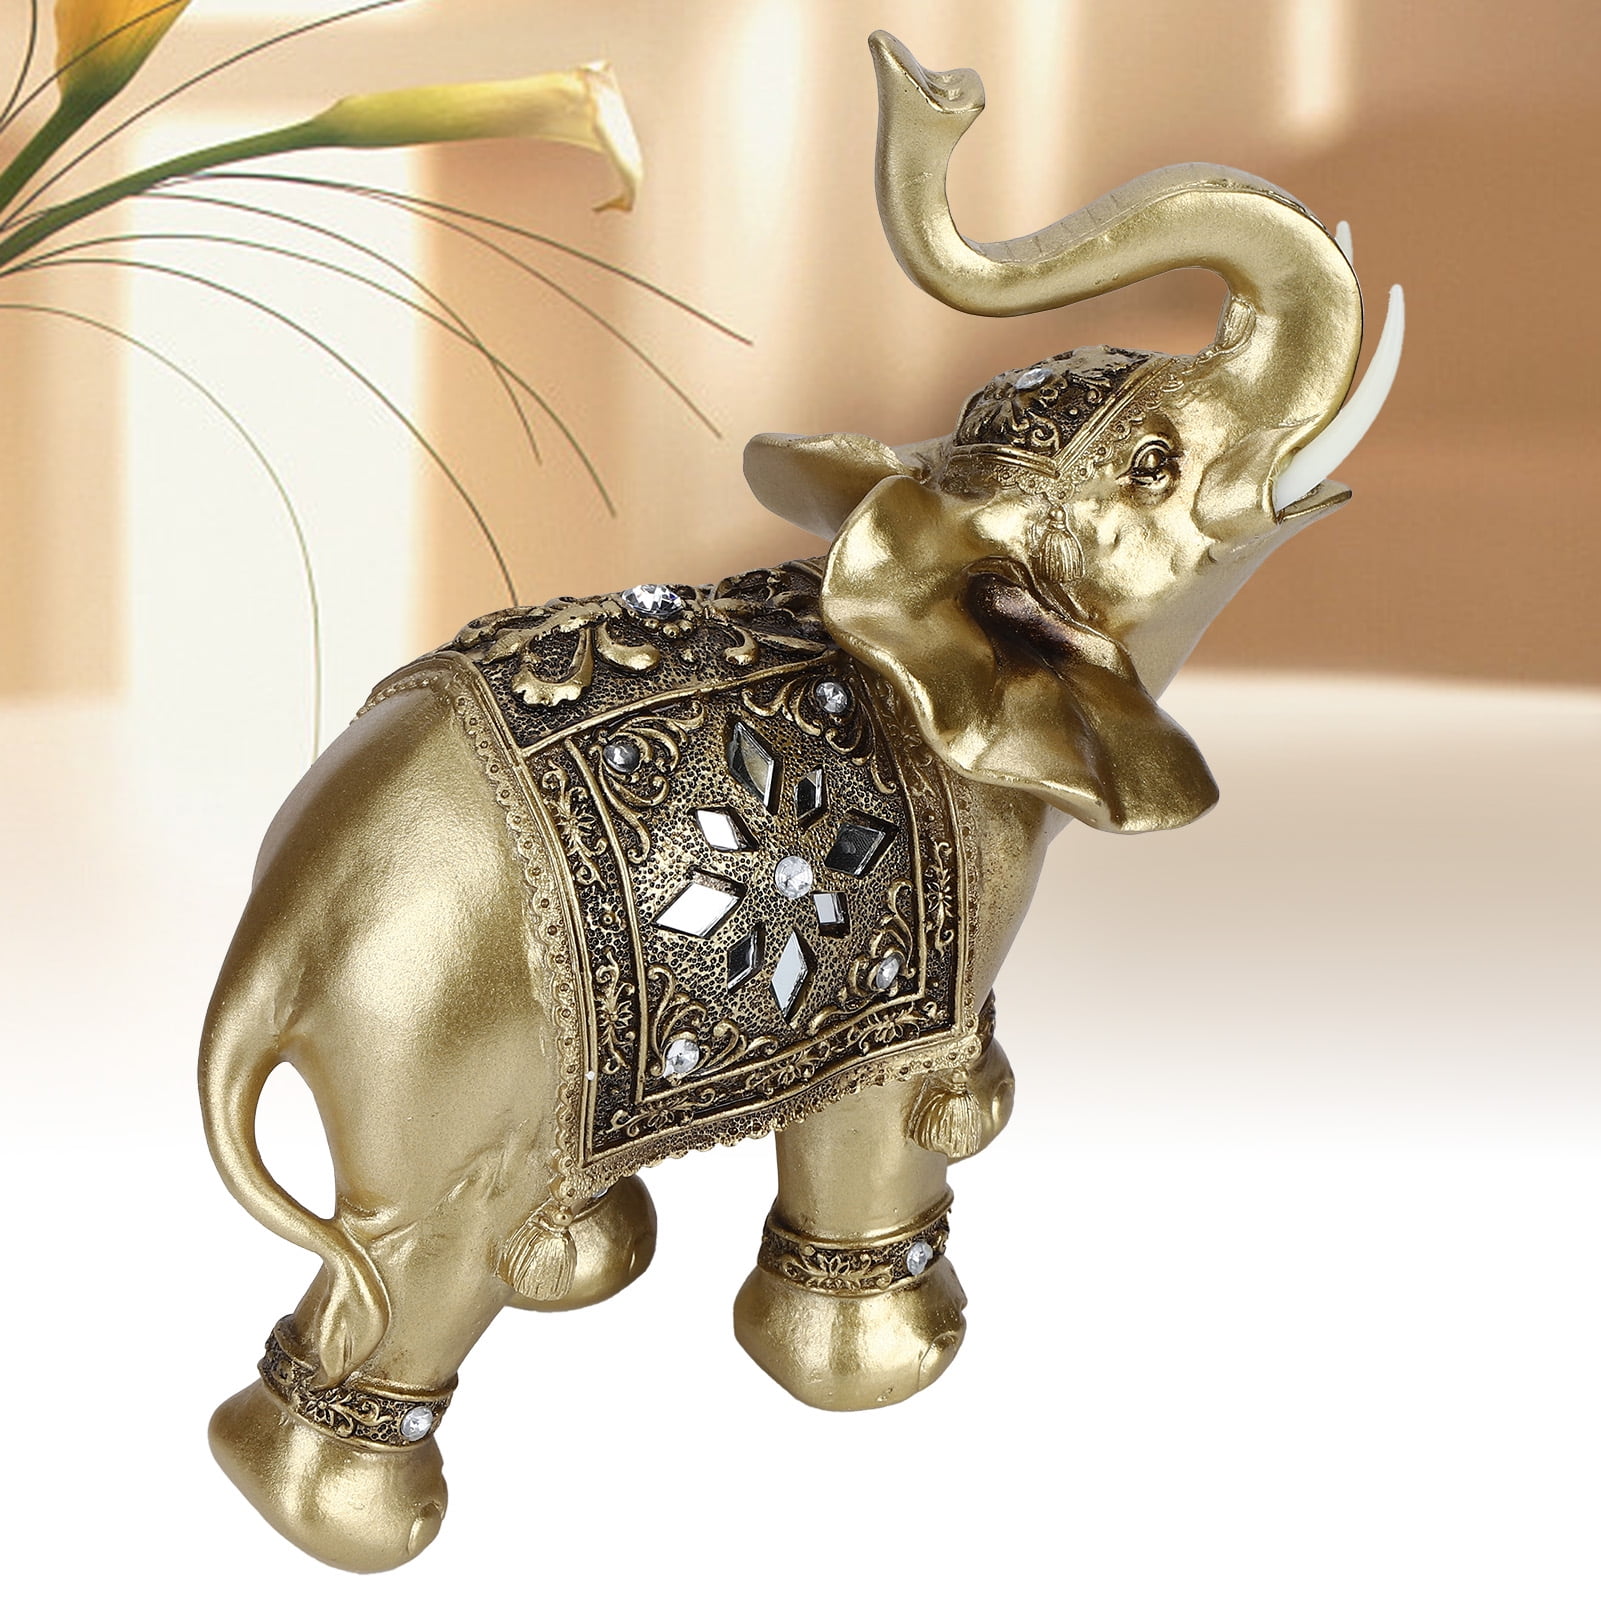 Shudehill Silver Mosaic Elephant Trunk up Ornament Lucky Gift Home Decor Exotic 